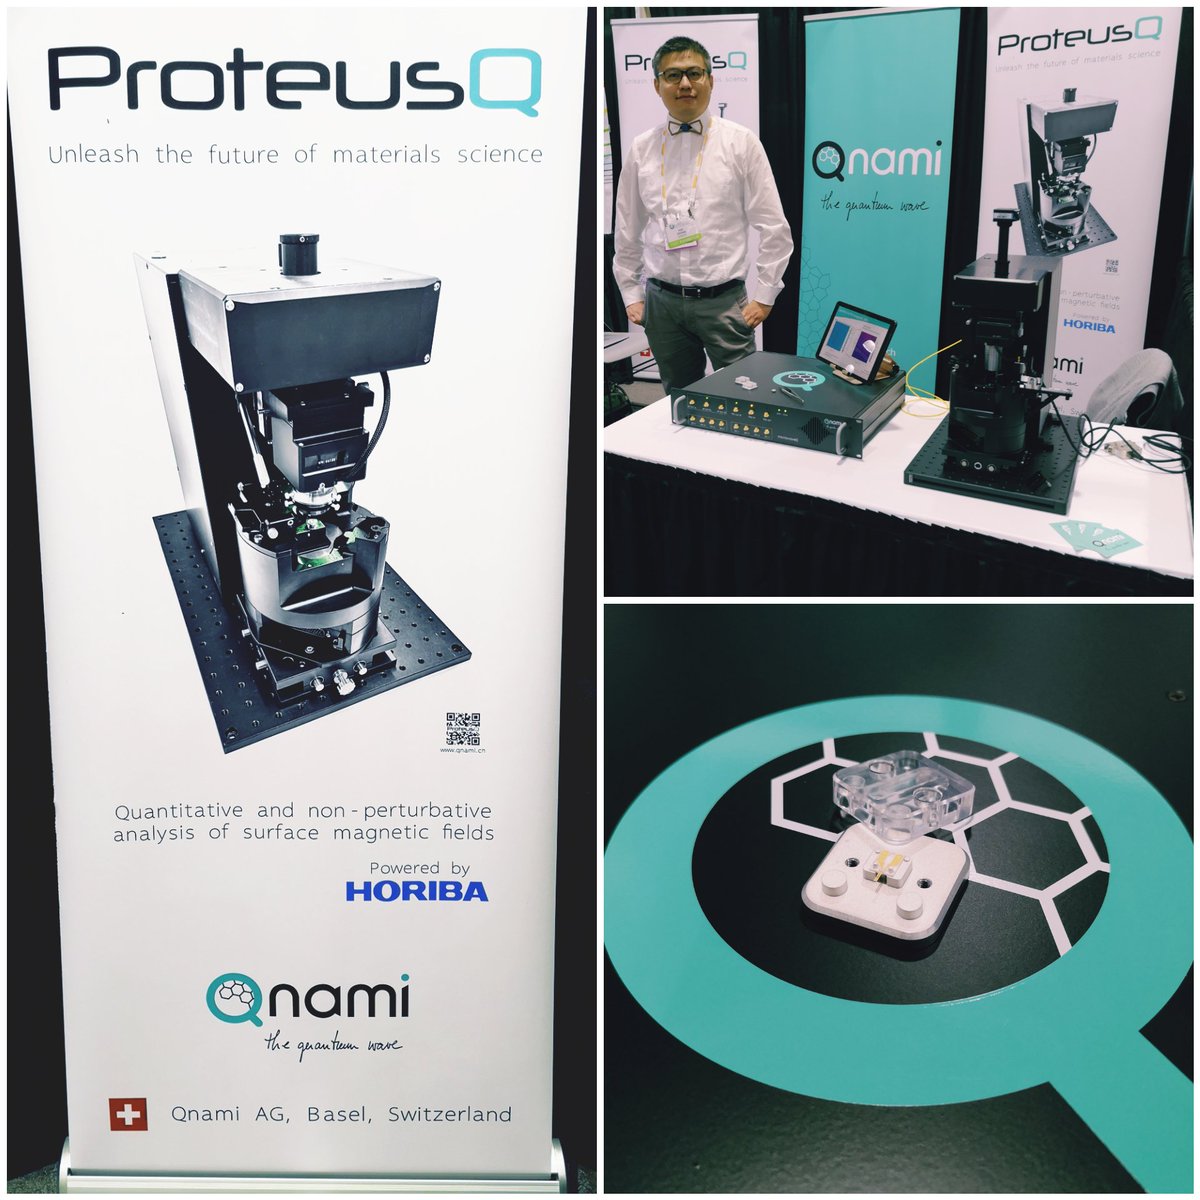 Closing the year with the presentation of our quantum microscope, the #ProteusQ, developed with @HORIBA_jp at #MRS2019 💎🔬🇨🇭😀 #quantumwave